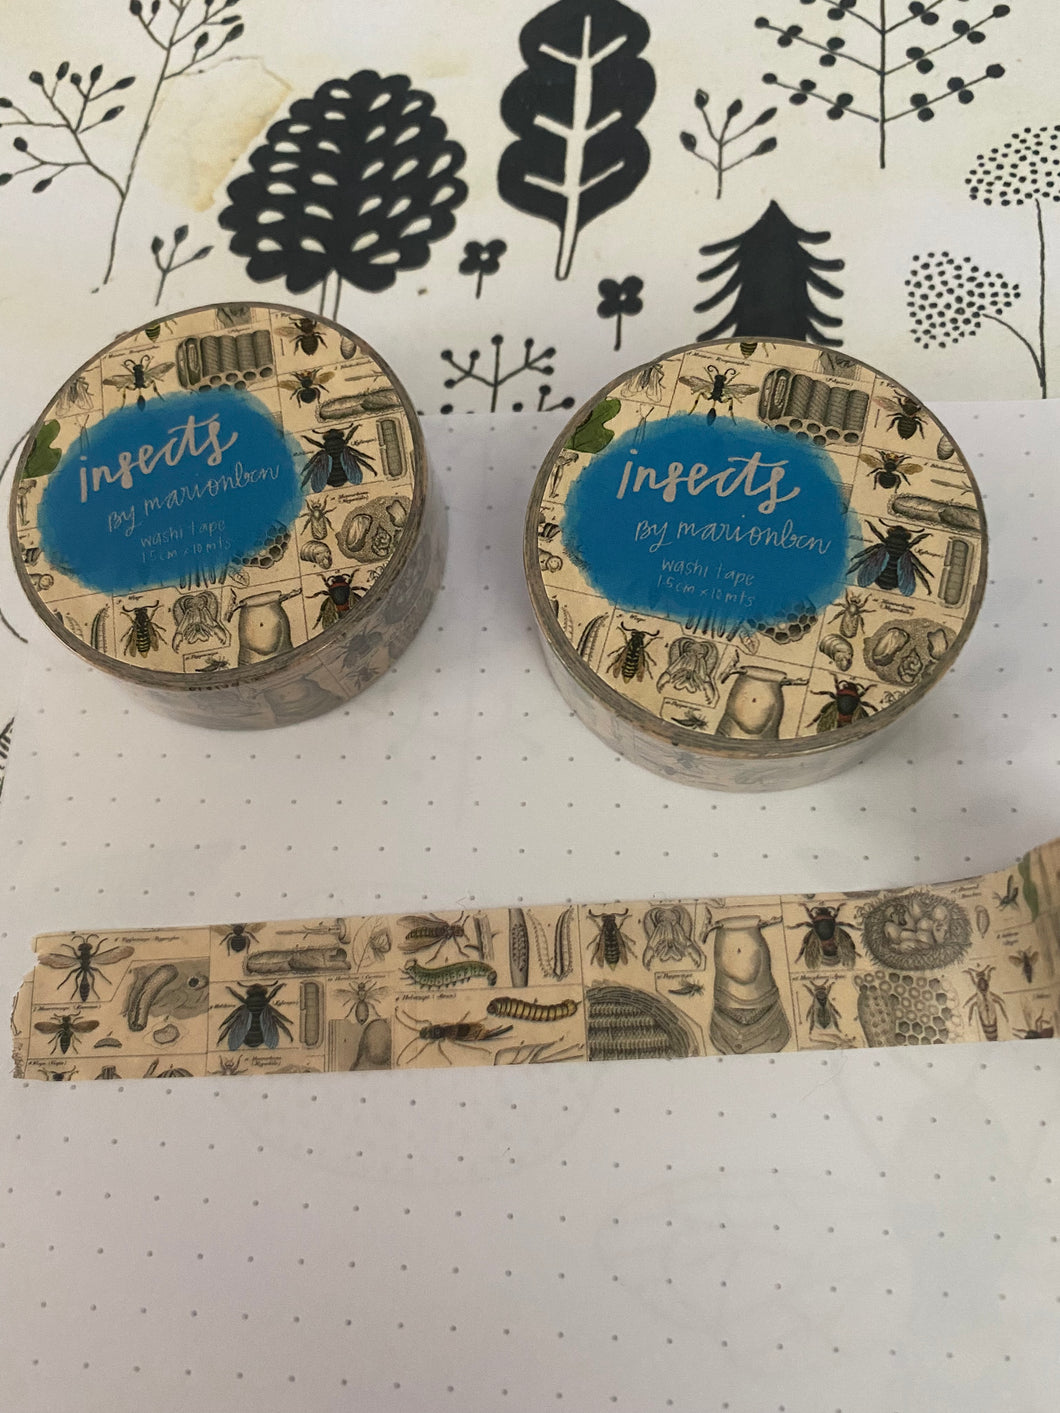 Insects washi tape